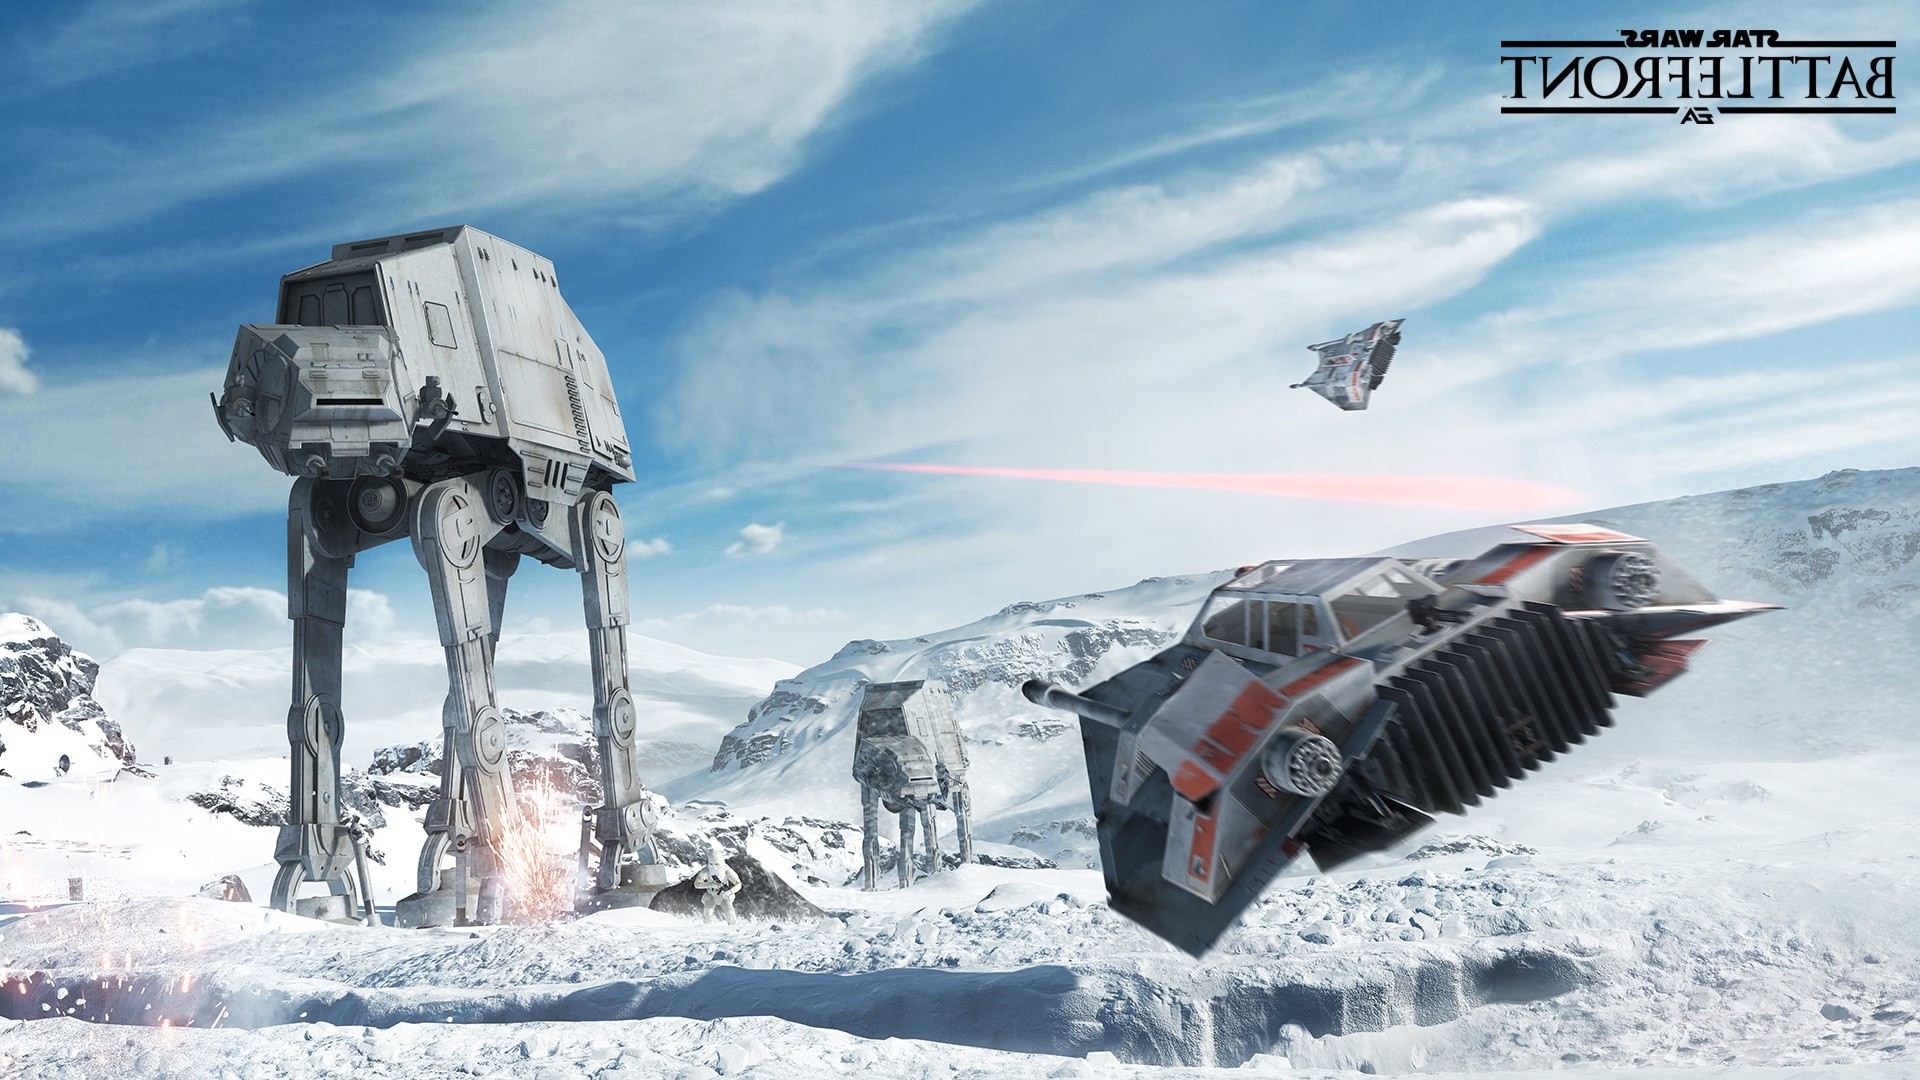 Star Wars Battlefront Art Hd Movies 4k Wallpapers Images